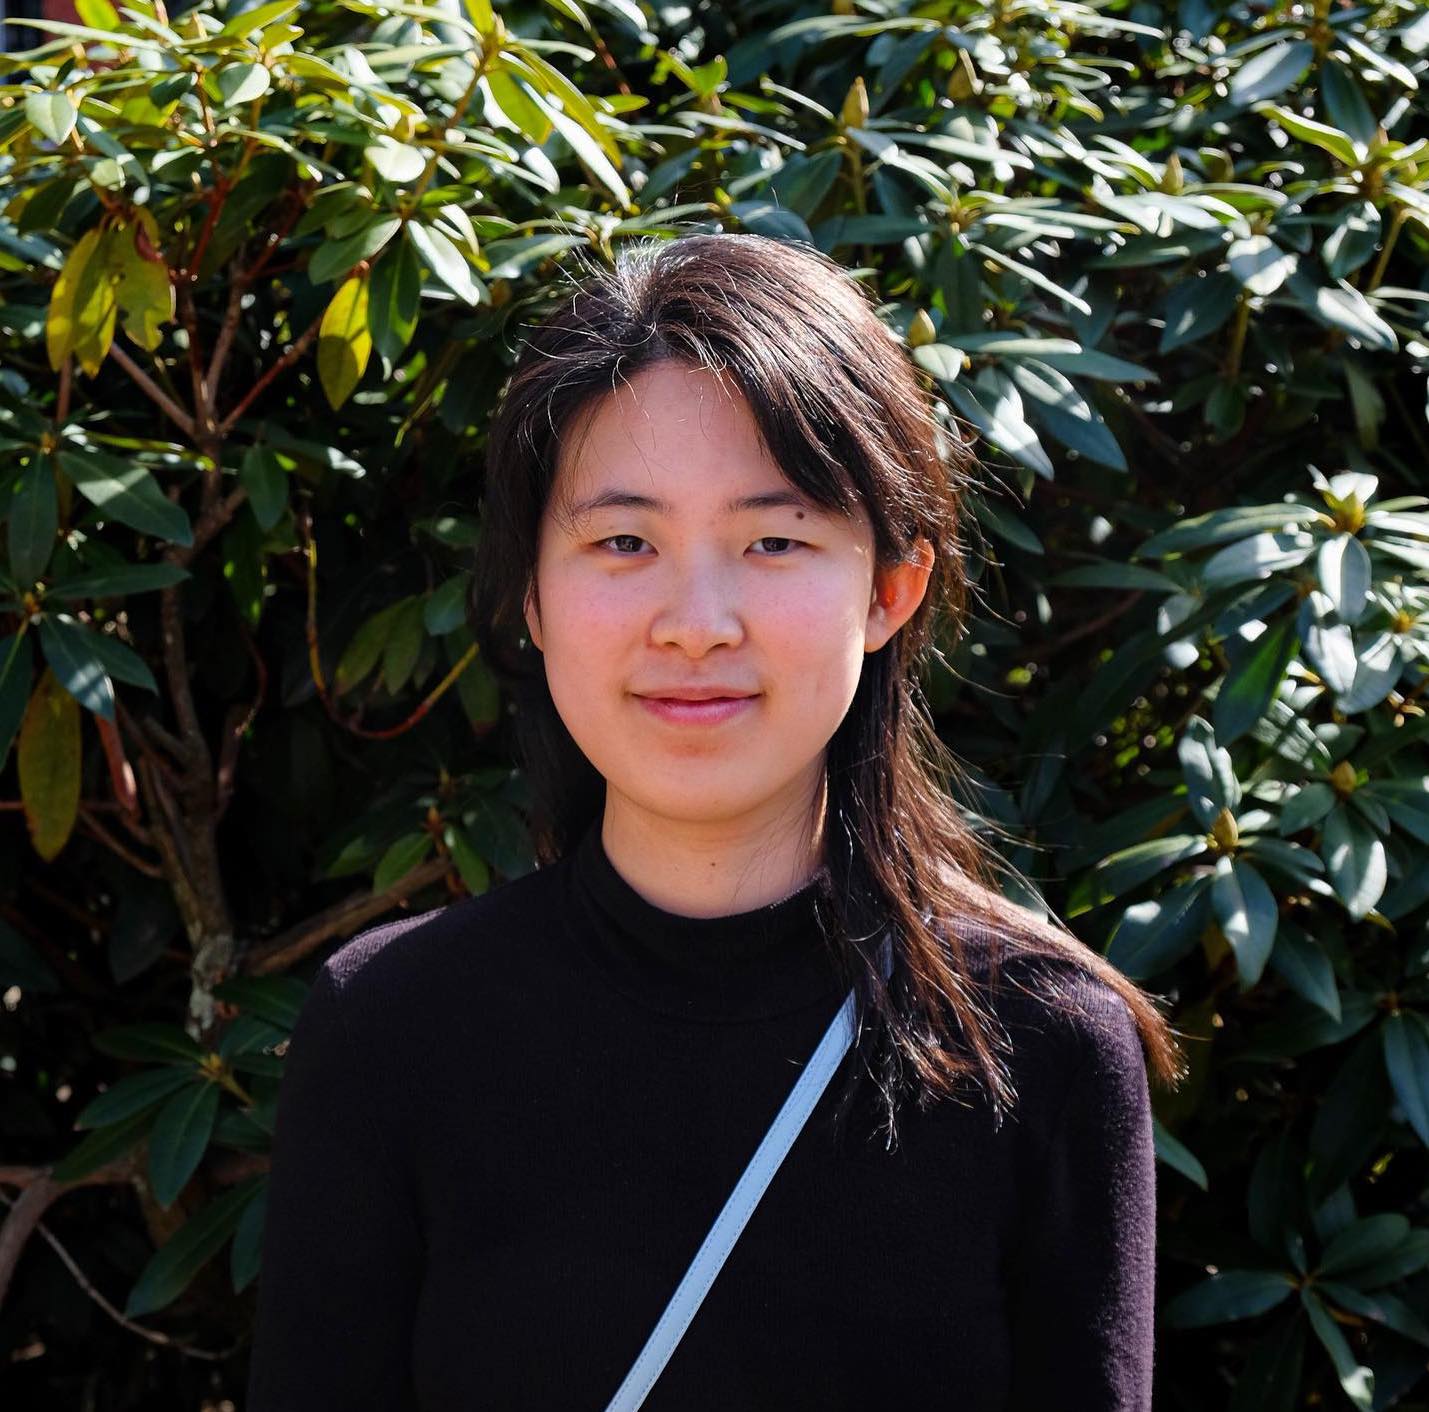 Rachel Ma, Sc.B (with Honors) in Computer Science, Brown University.